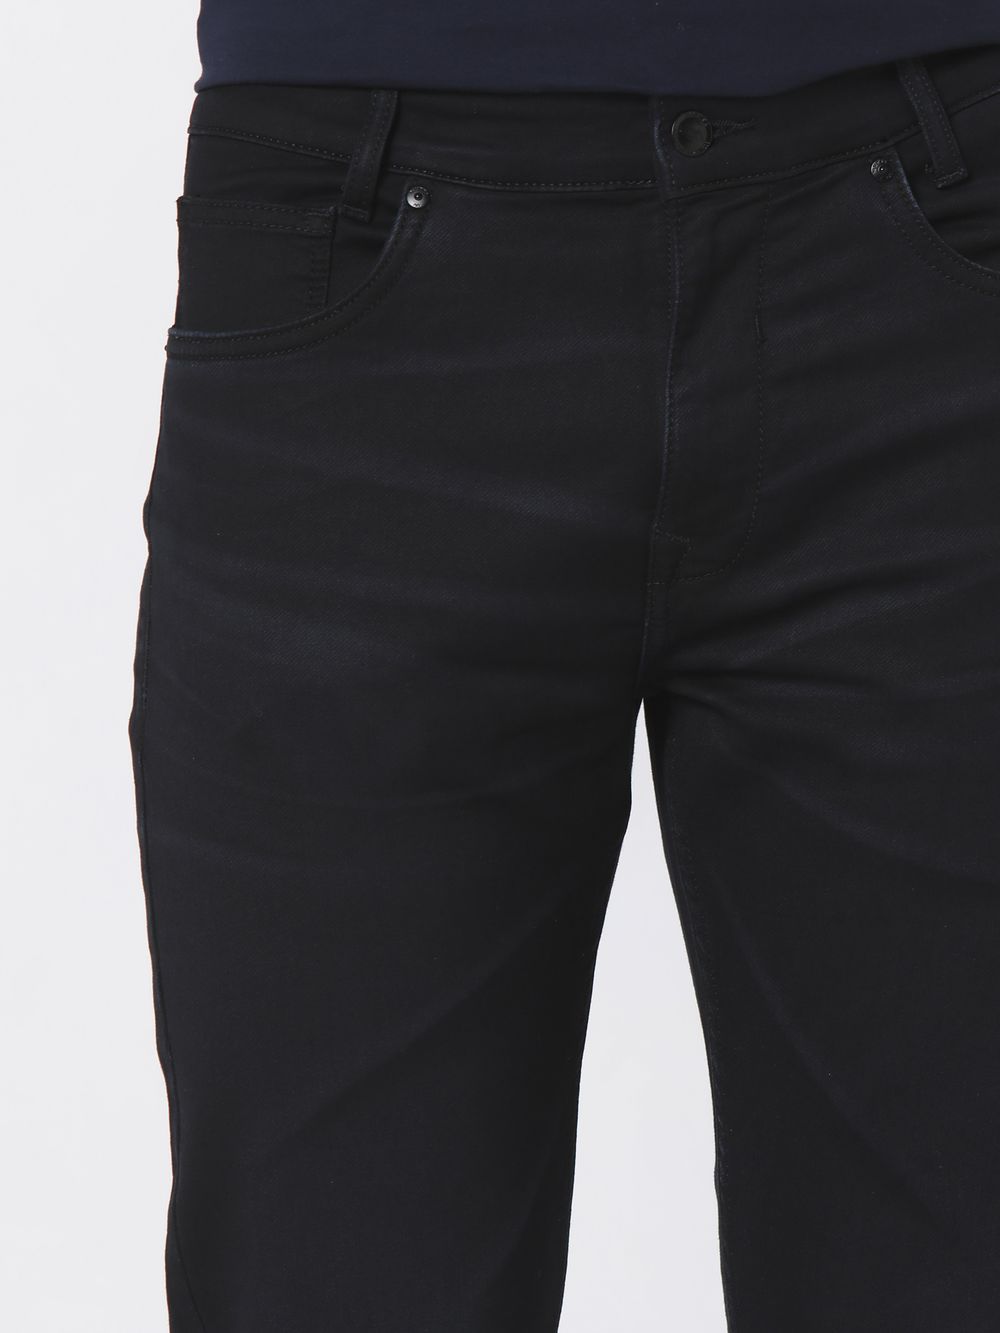 Black Relaxed Straight Fit Denim Deluxe Stretch Jeans